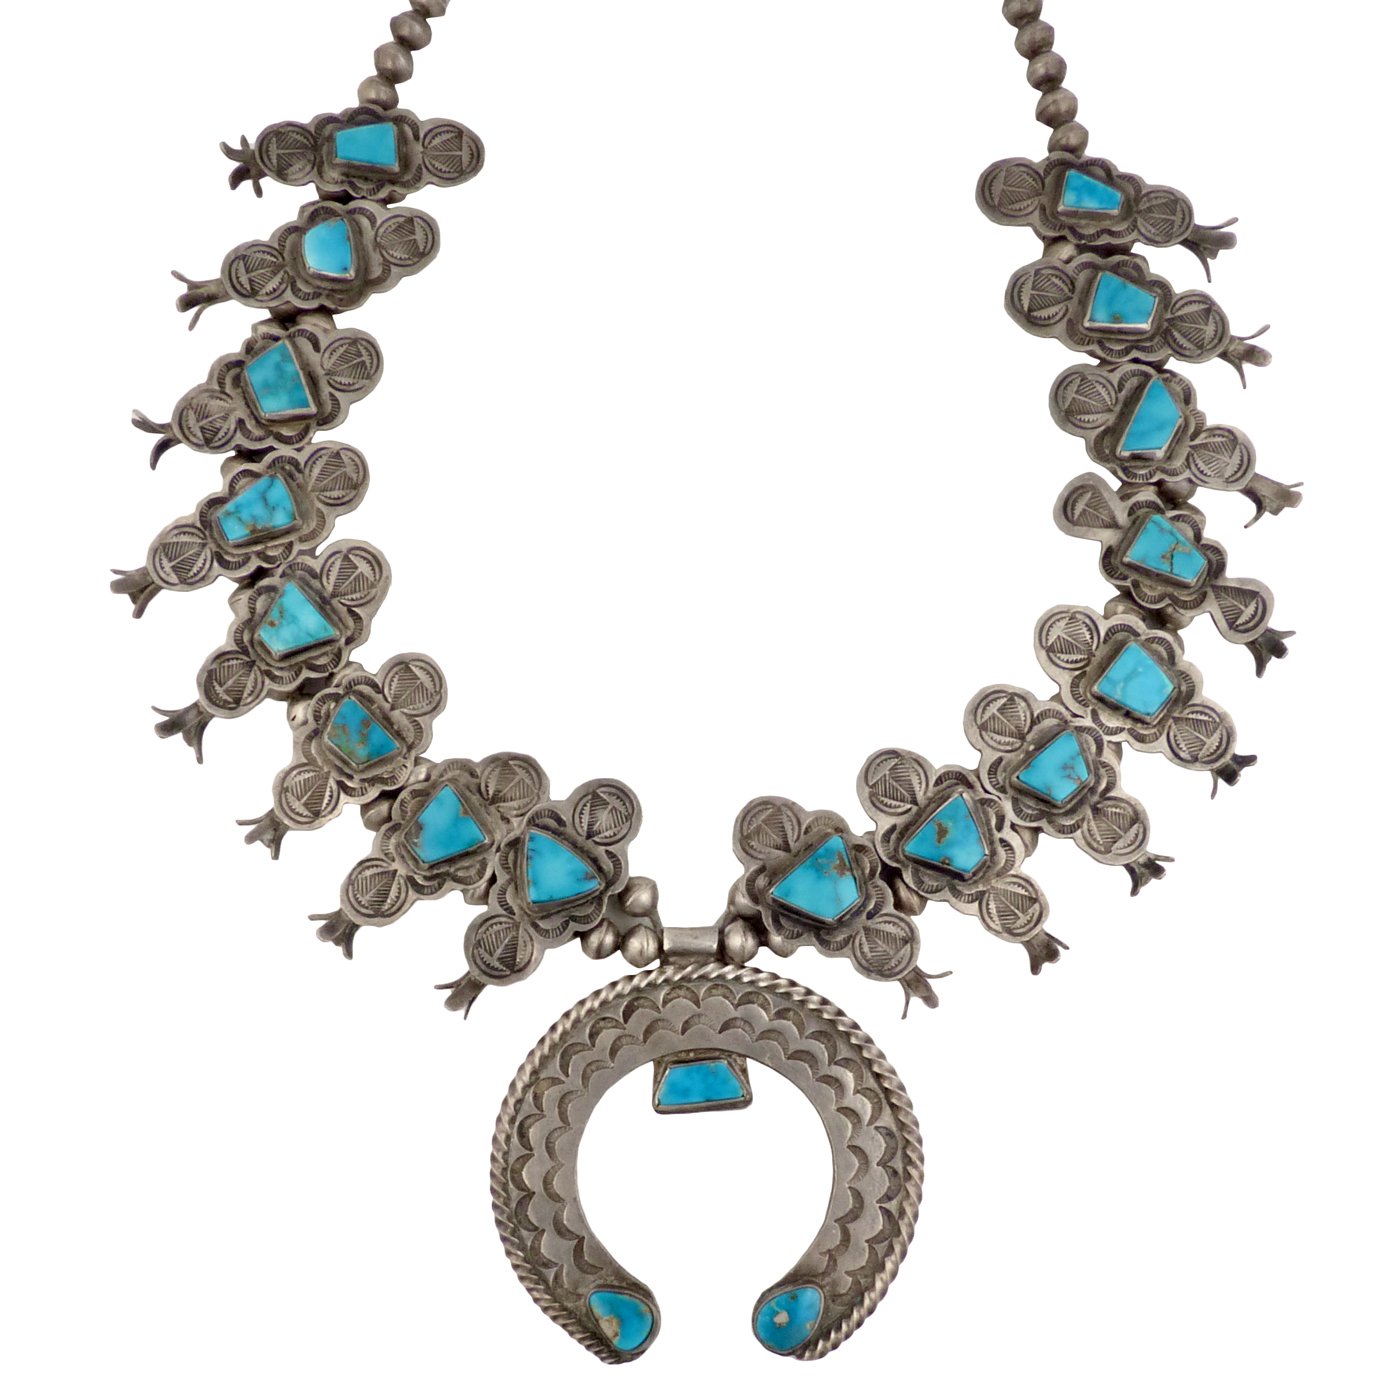 Navajo Silver and Blue Gem Turquoise Squash Blossom Necklace, c.1940 ...